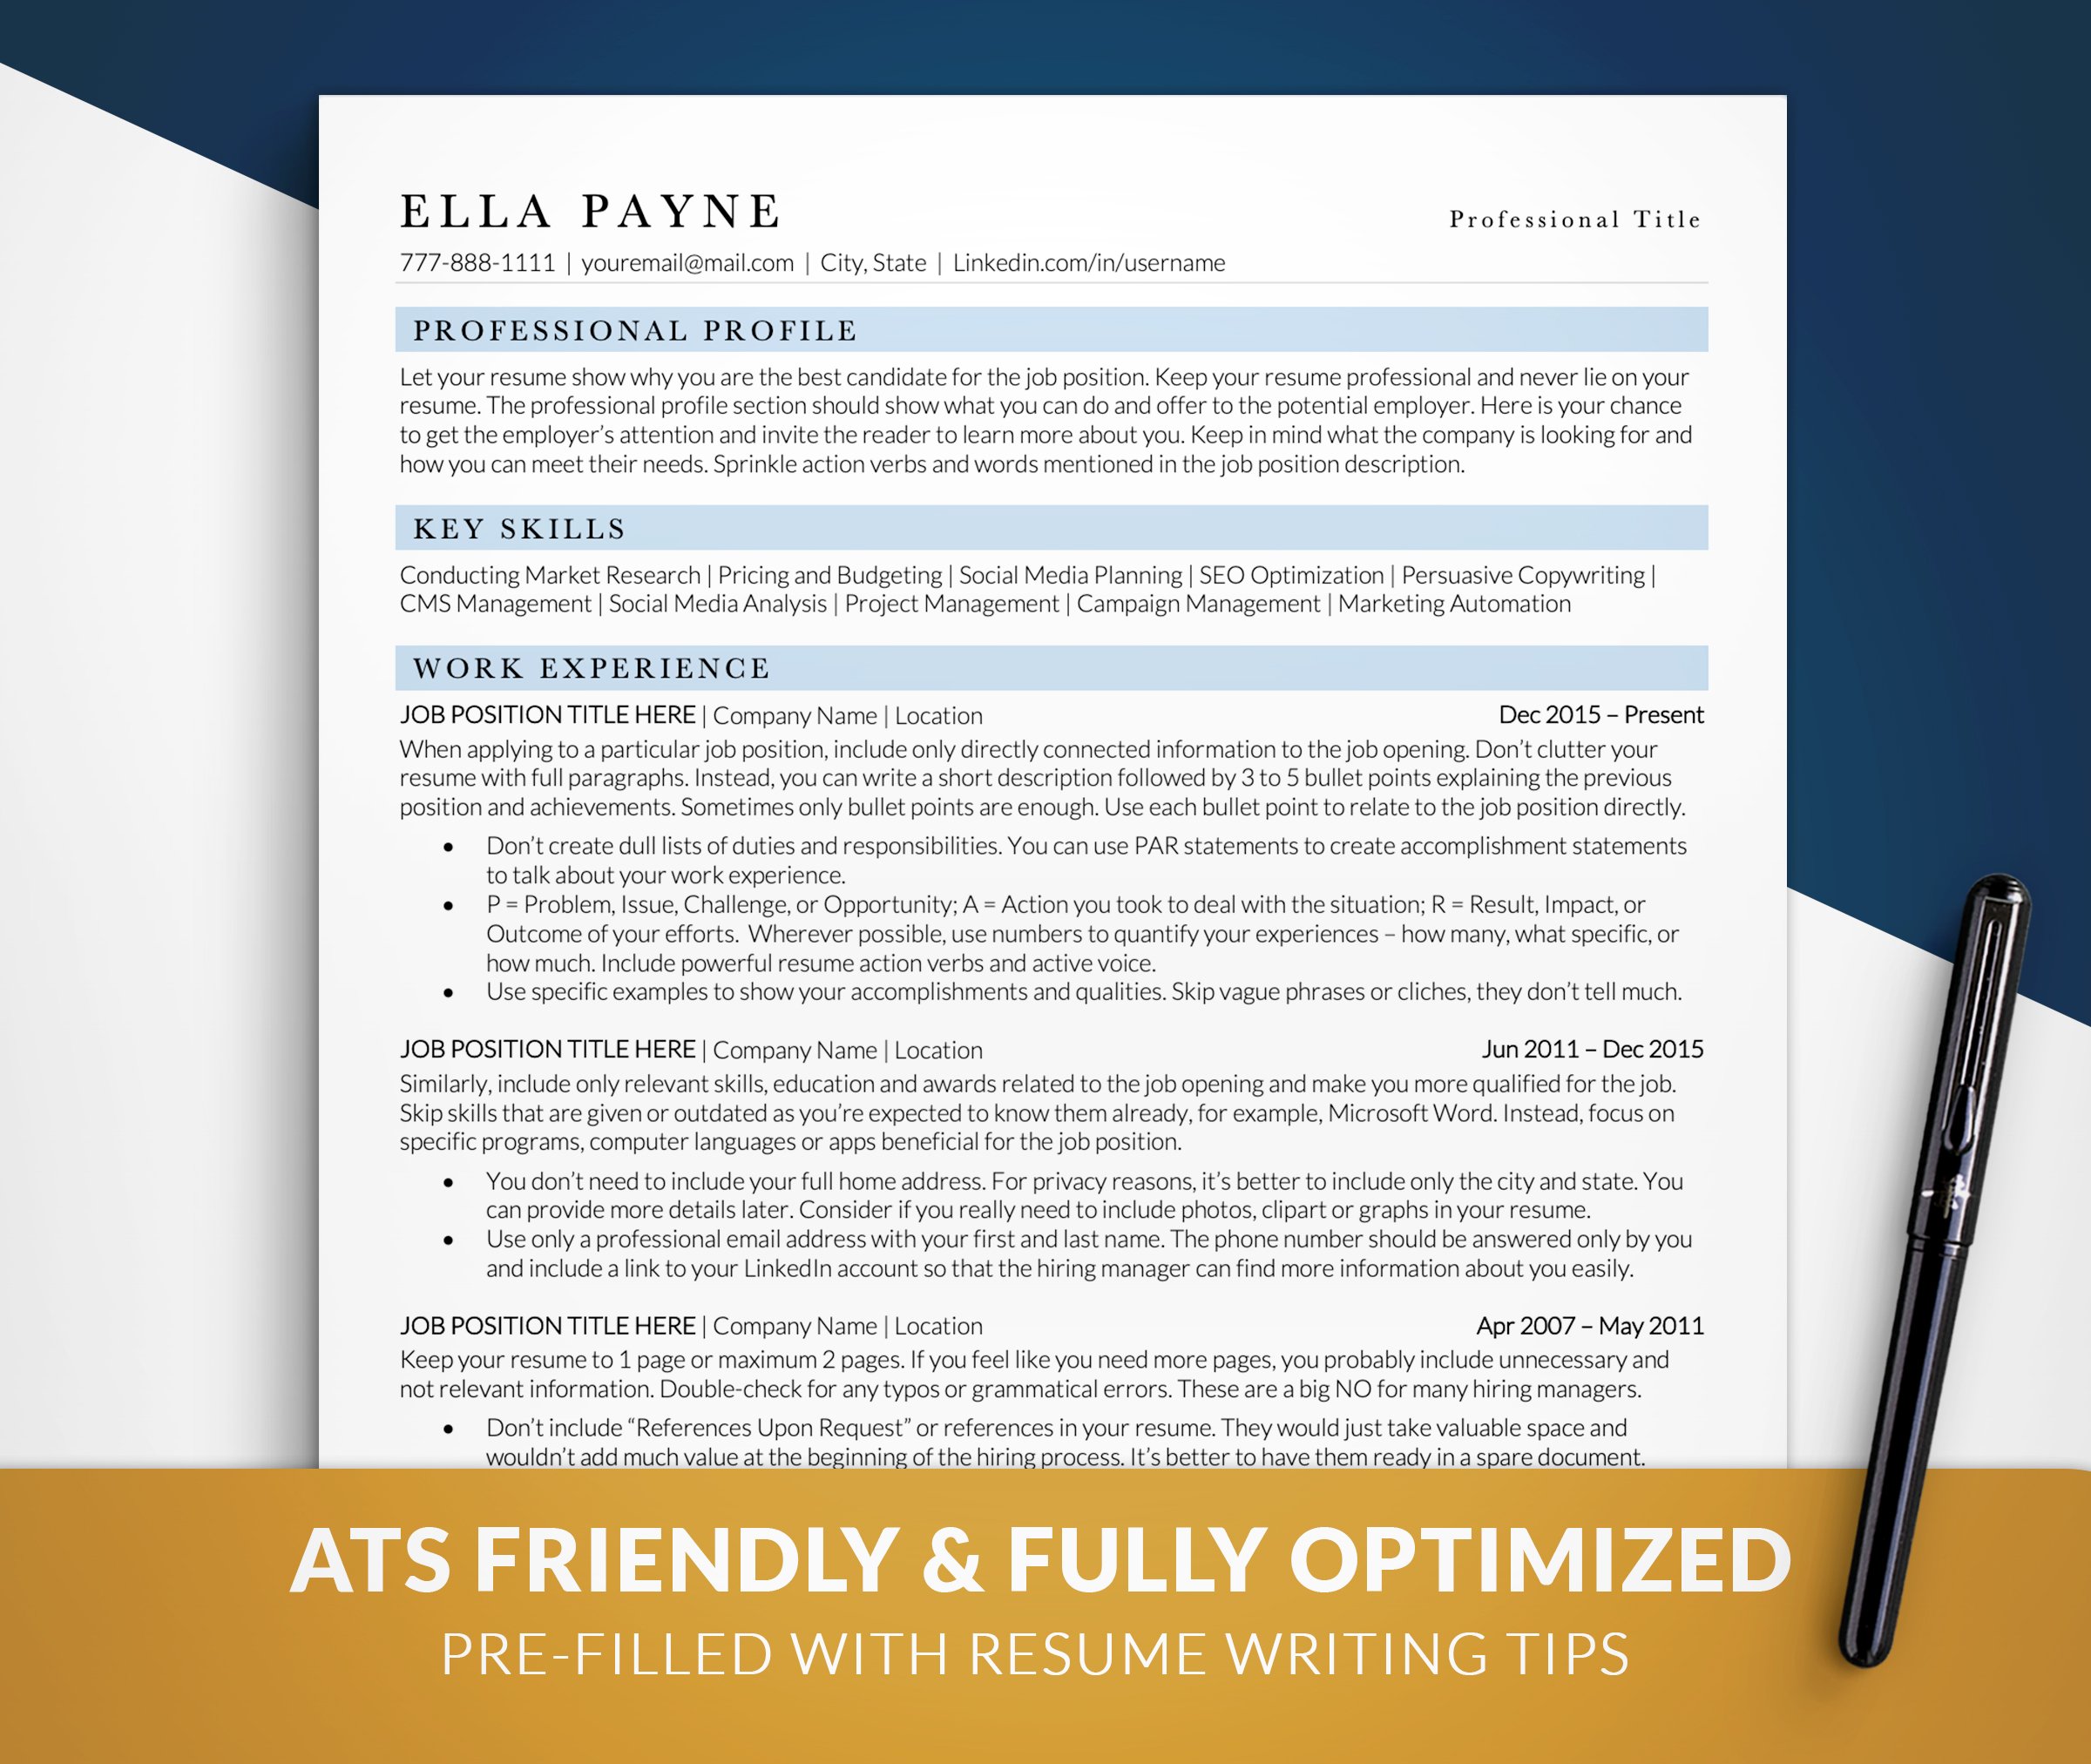 ATS Optimized Resume Template Blue cover image.